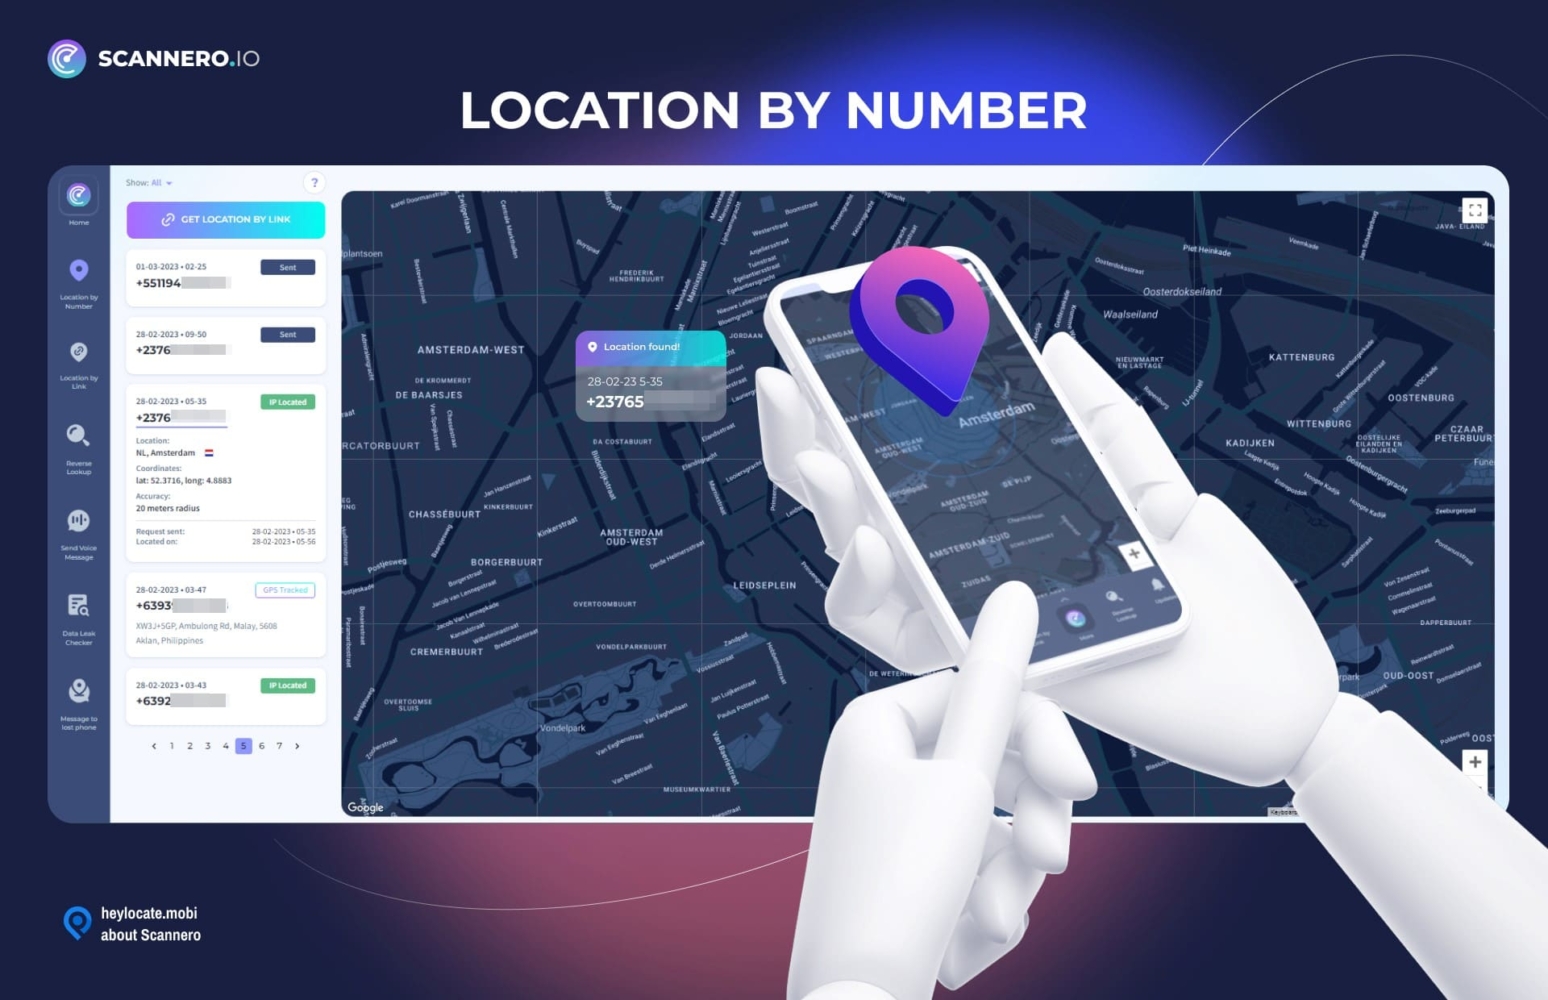 An illustration of a hand holding a smartphone with the Scannero.io app open, pinpointing a location on a map, alongside interface elements showing location tracking by phone number.